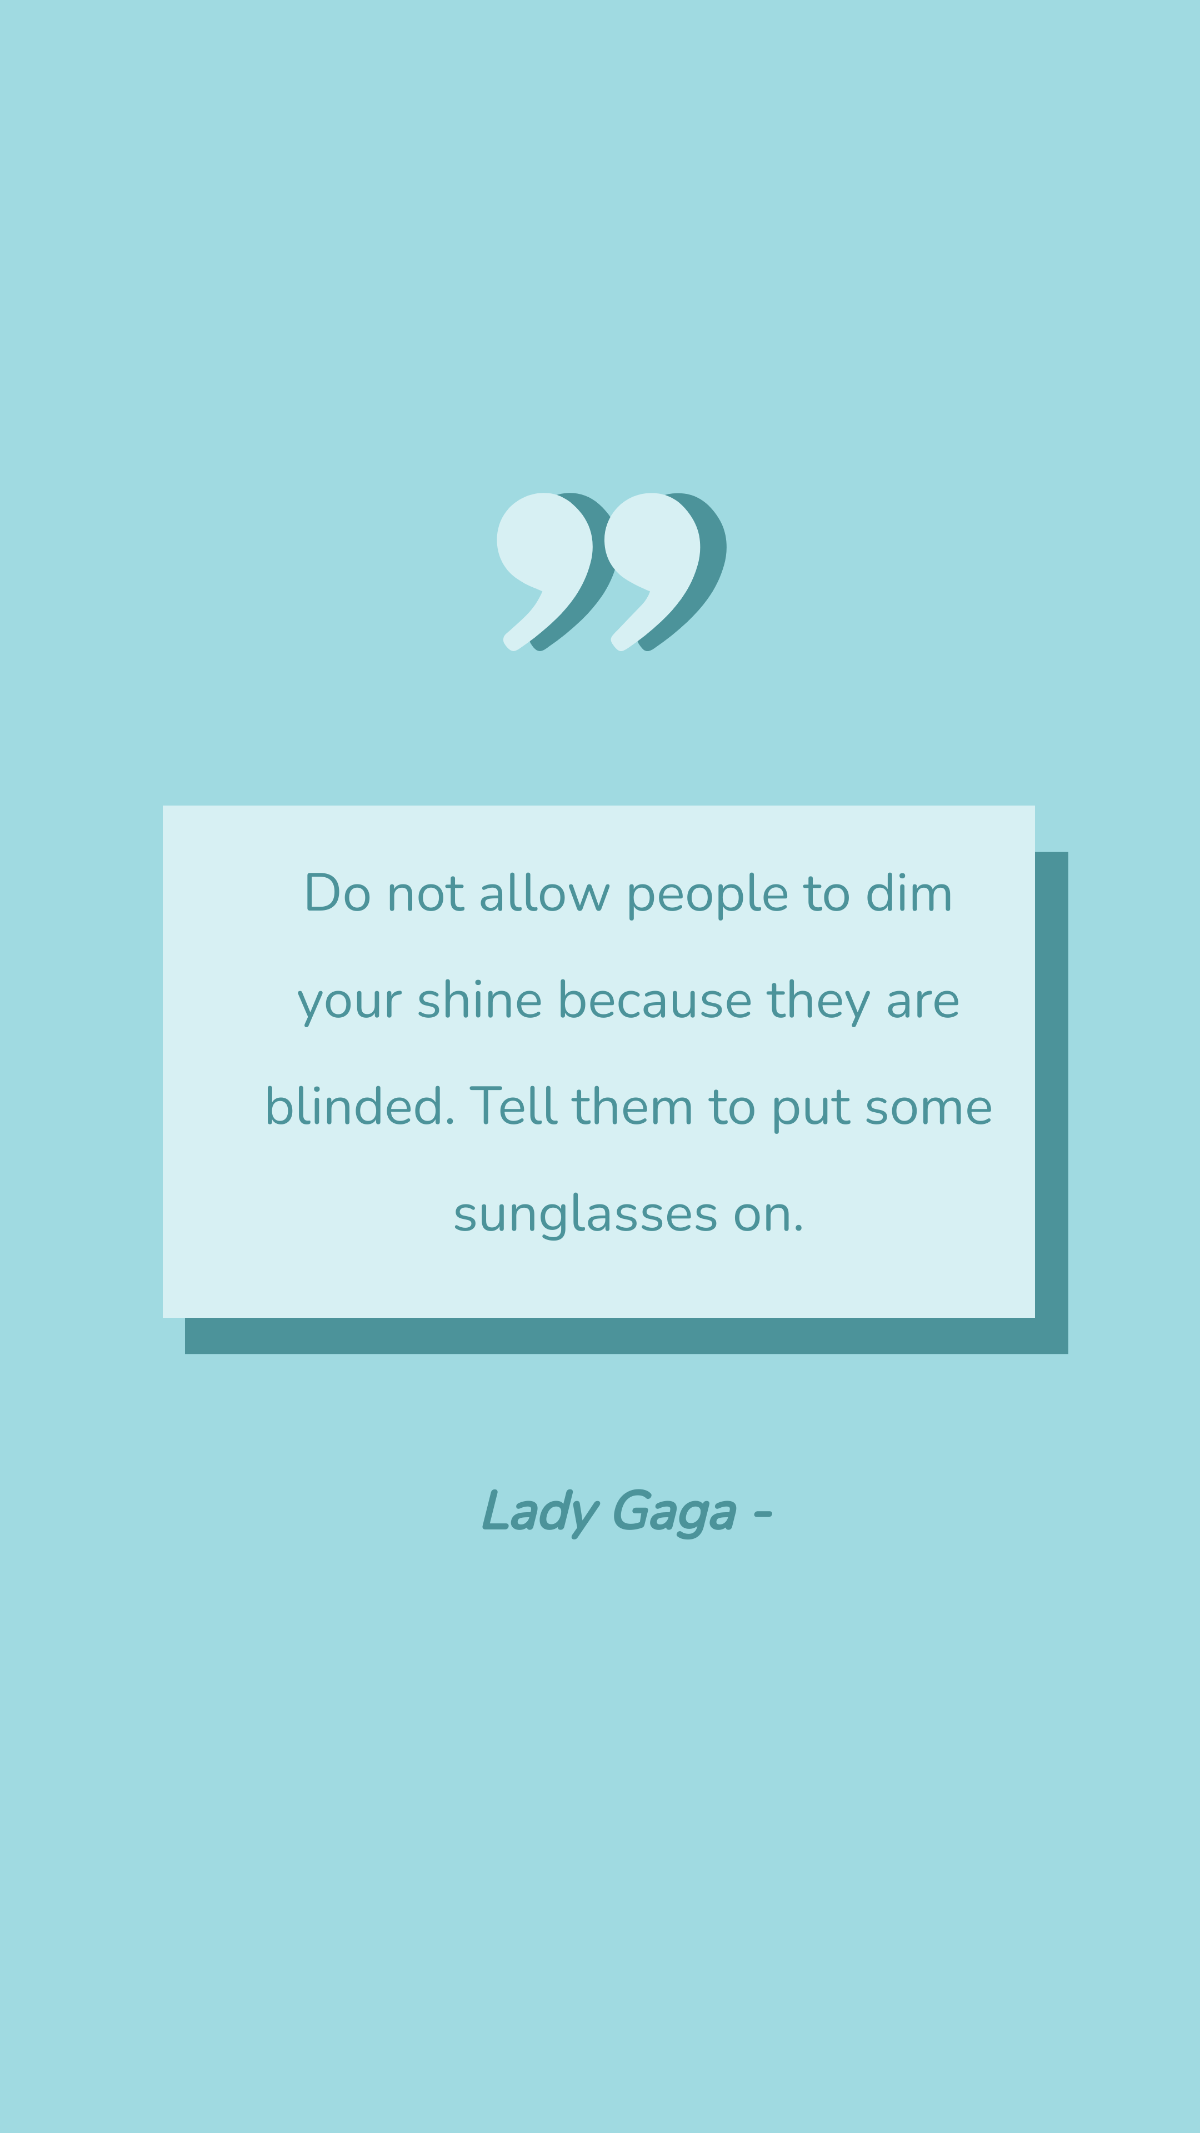 Lady Gaga - Do not allow people to dim your shine because they are blinded. Tell them to put some sunglasses on. Template